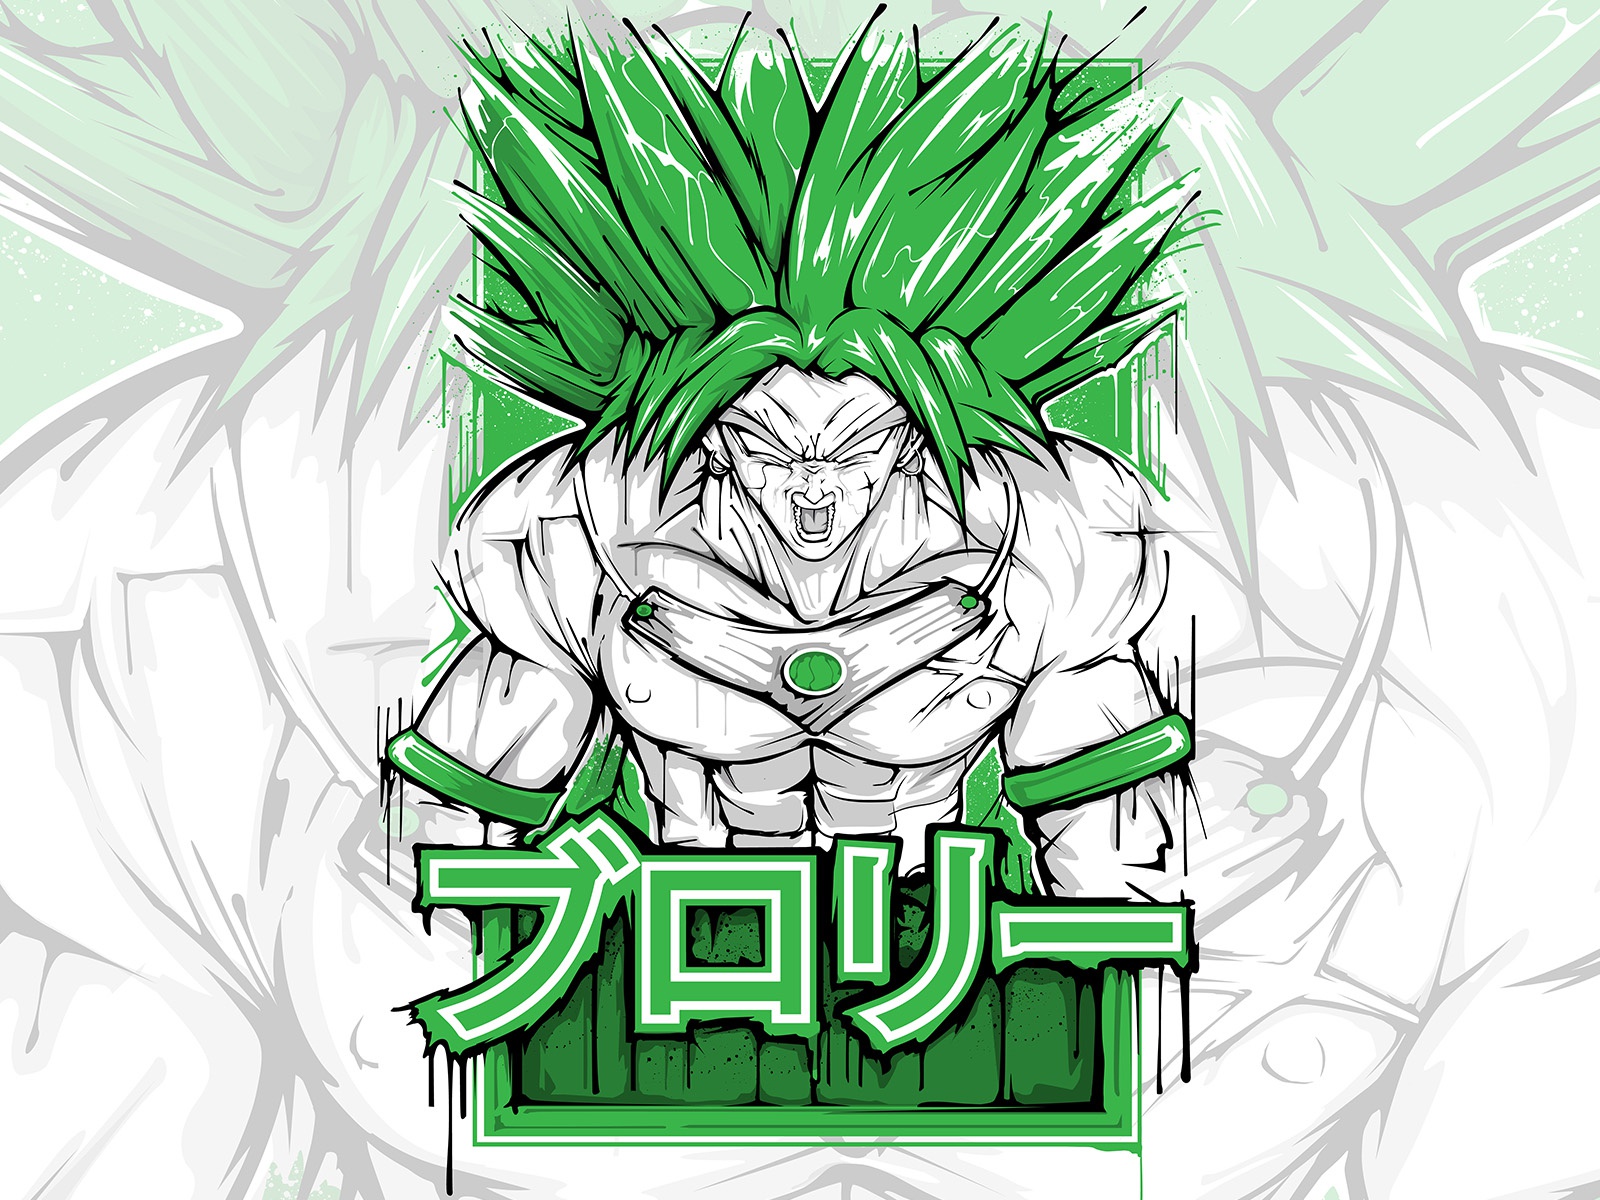 Dragonball Z Super Broly Drip Vector Illustration by Zac Counts on Dribbble...